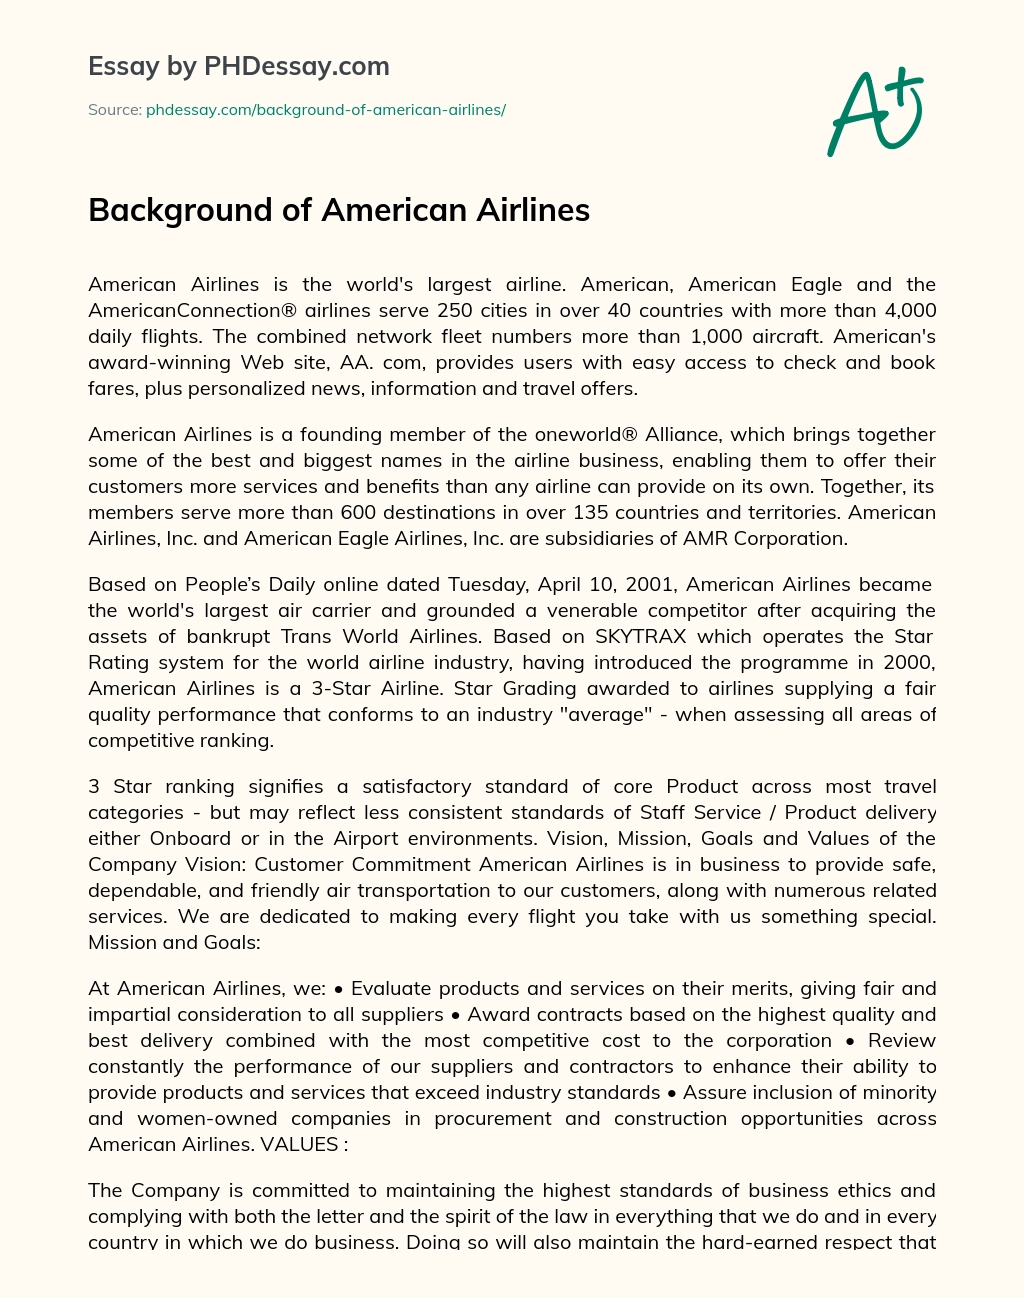 Background of American Airlines essay